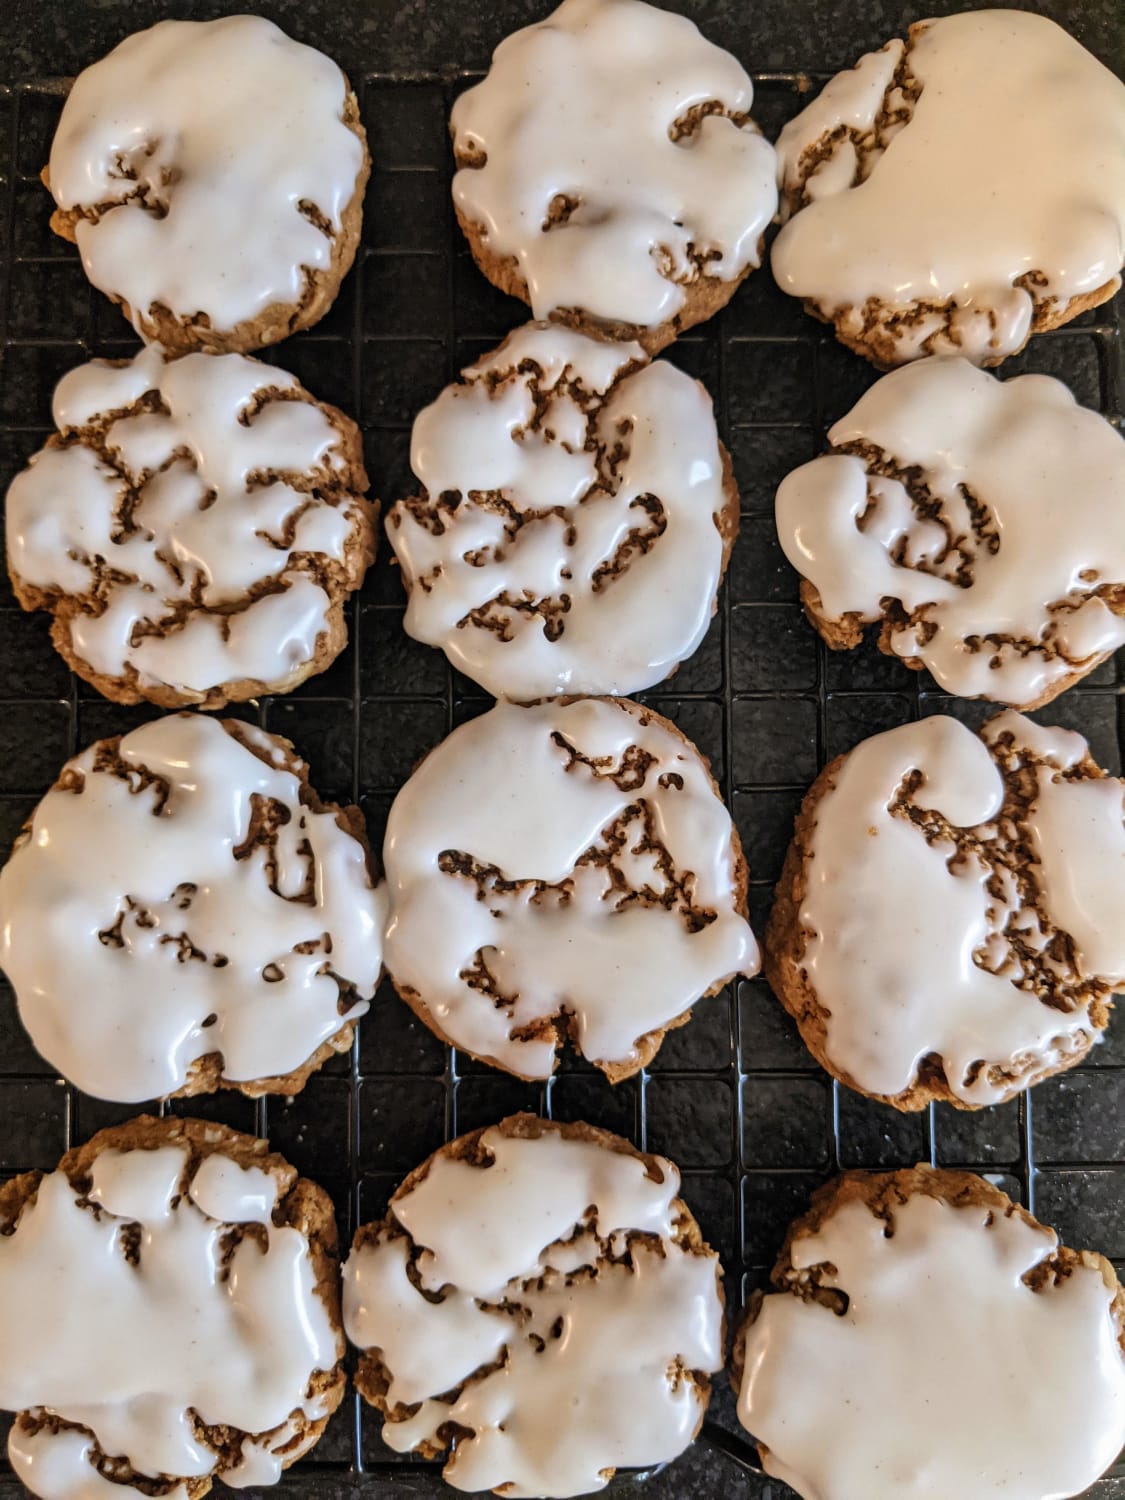 Iced gingerbread oatmeal cookies. Husband just snagged his third and fourth cookie, so I think they're a hit